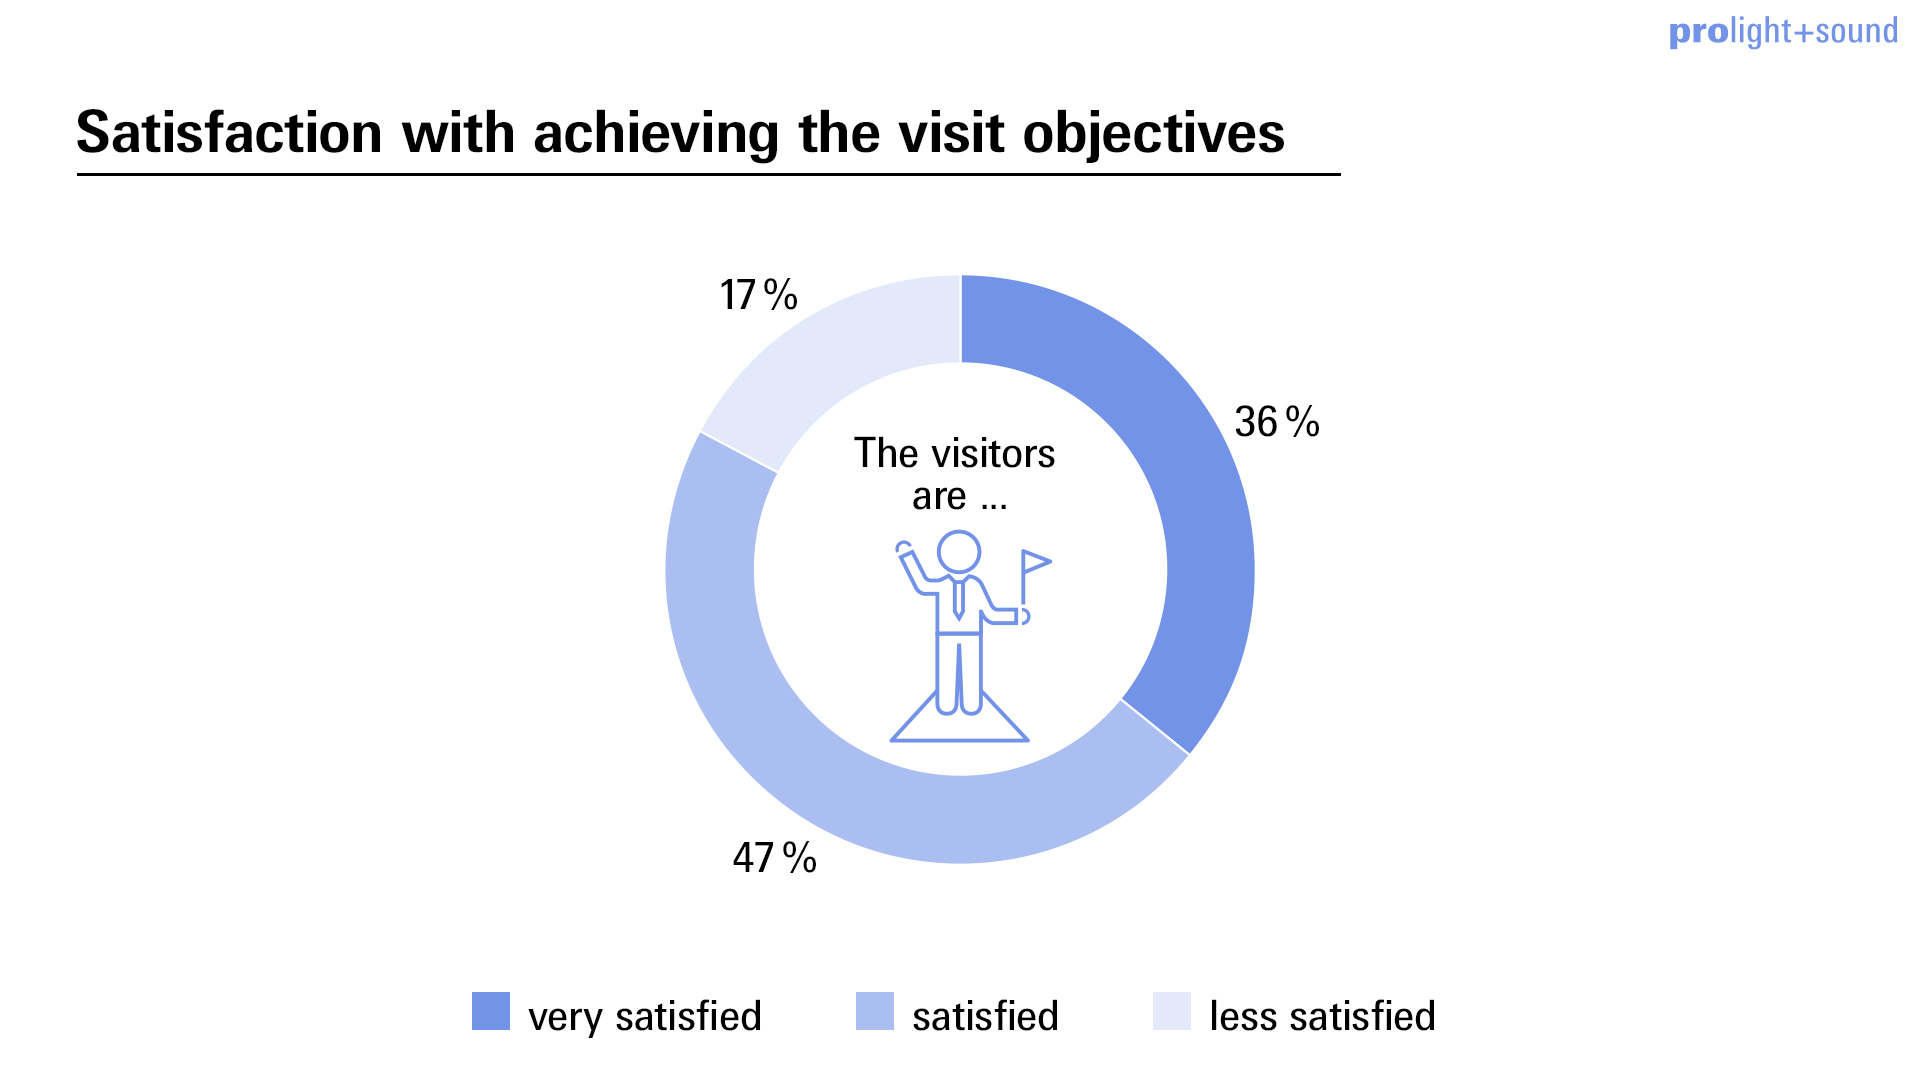 Prolight + Sound: Satisfaction with achieving the visit objectives 2022